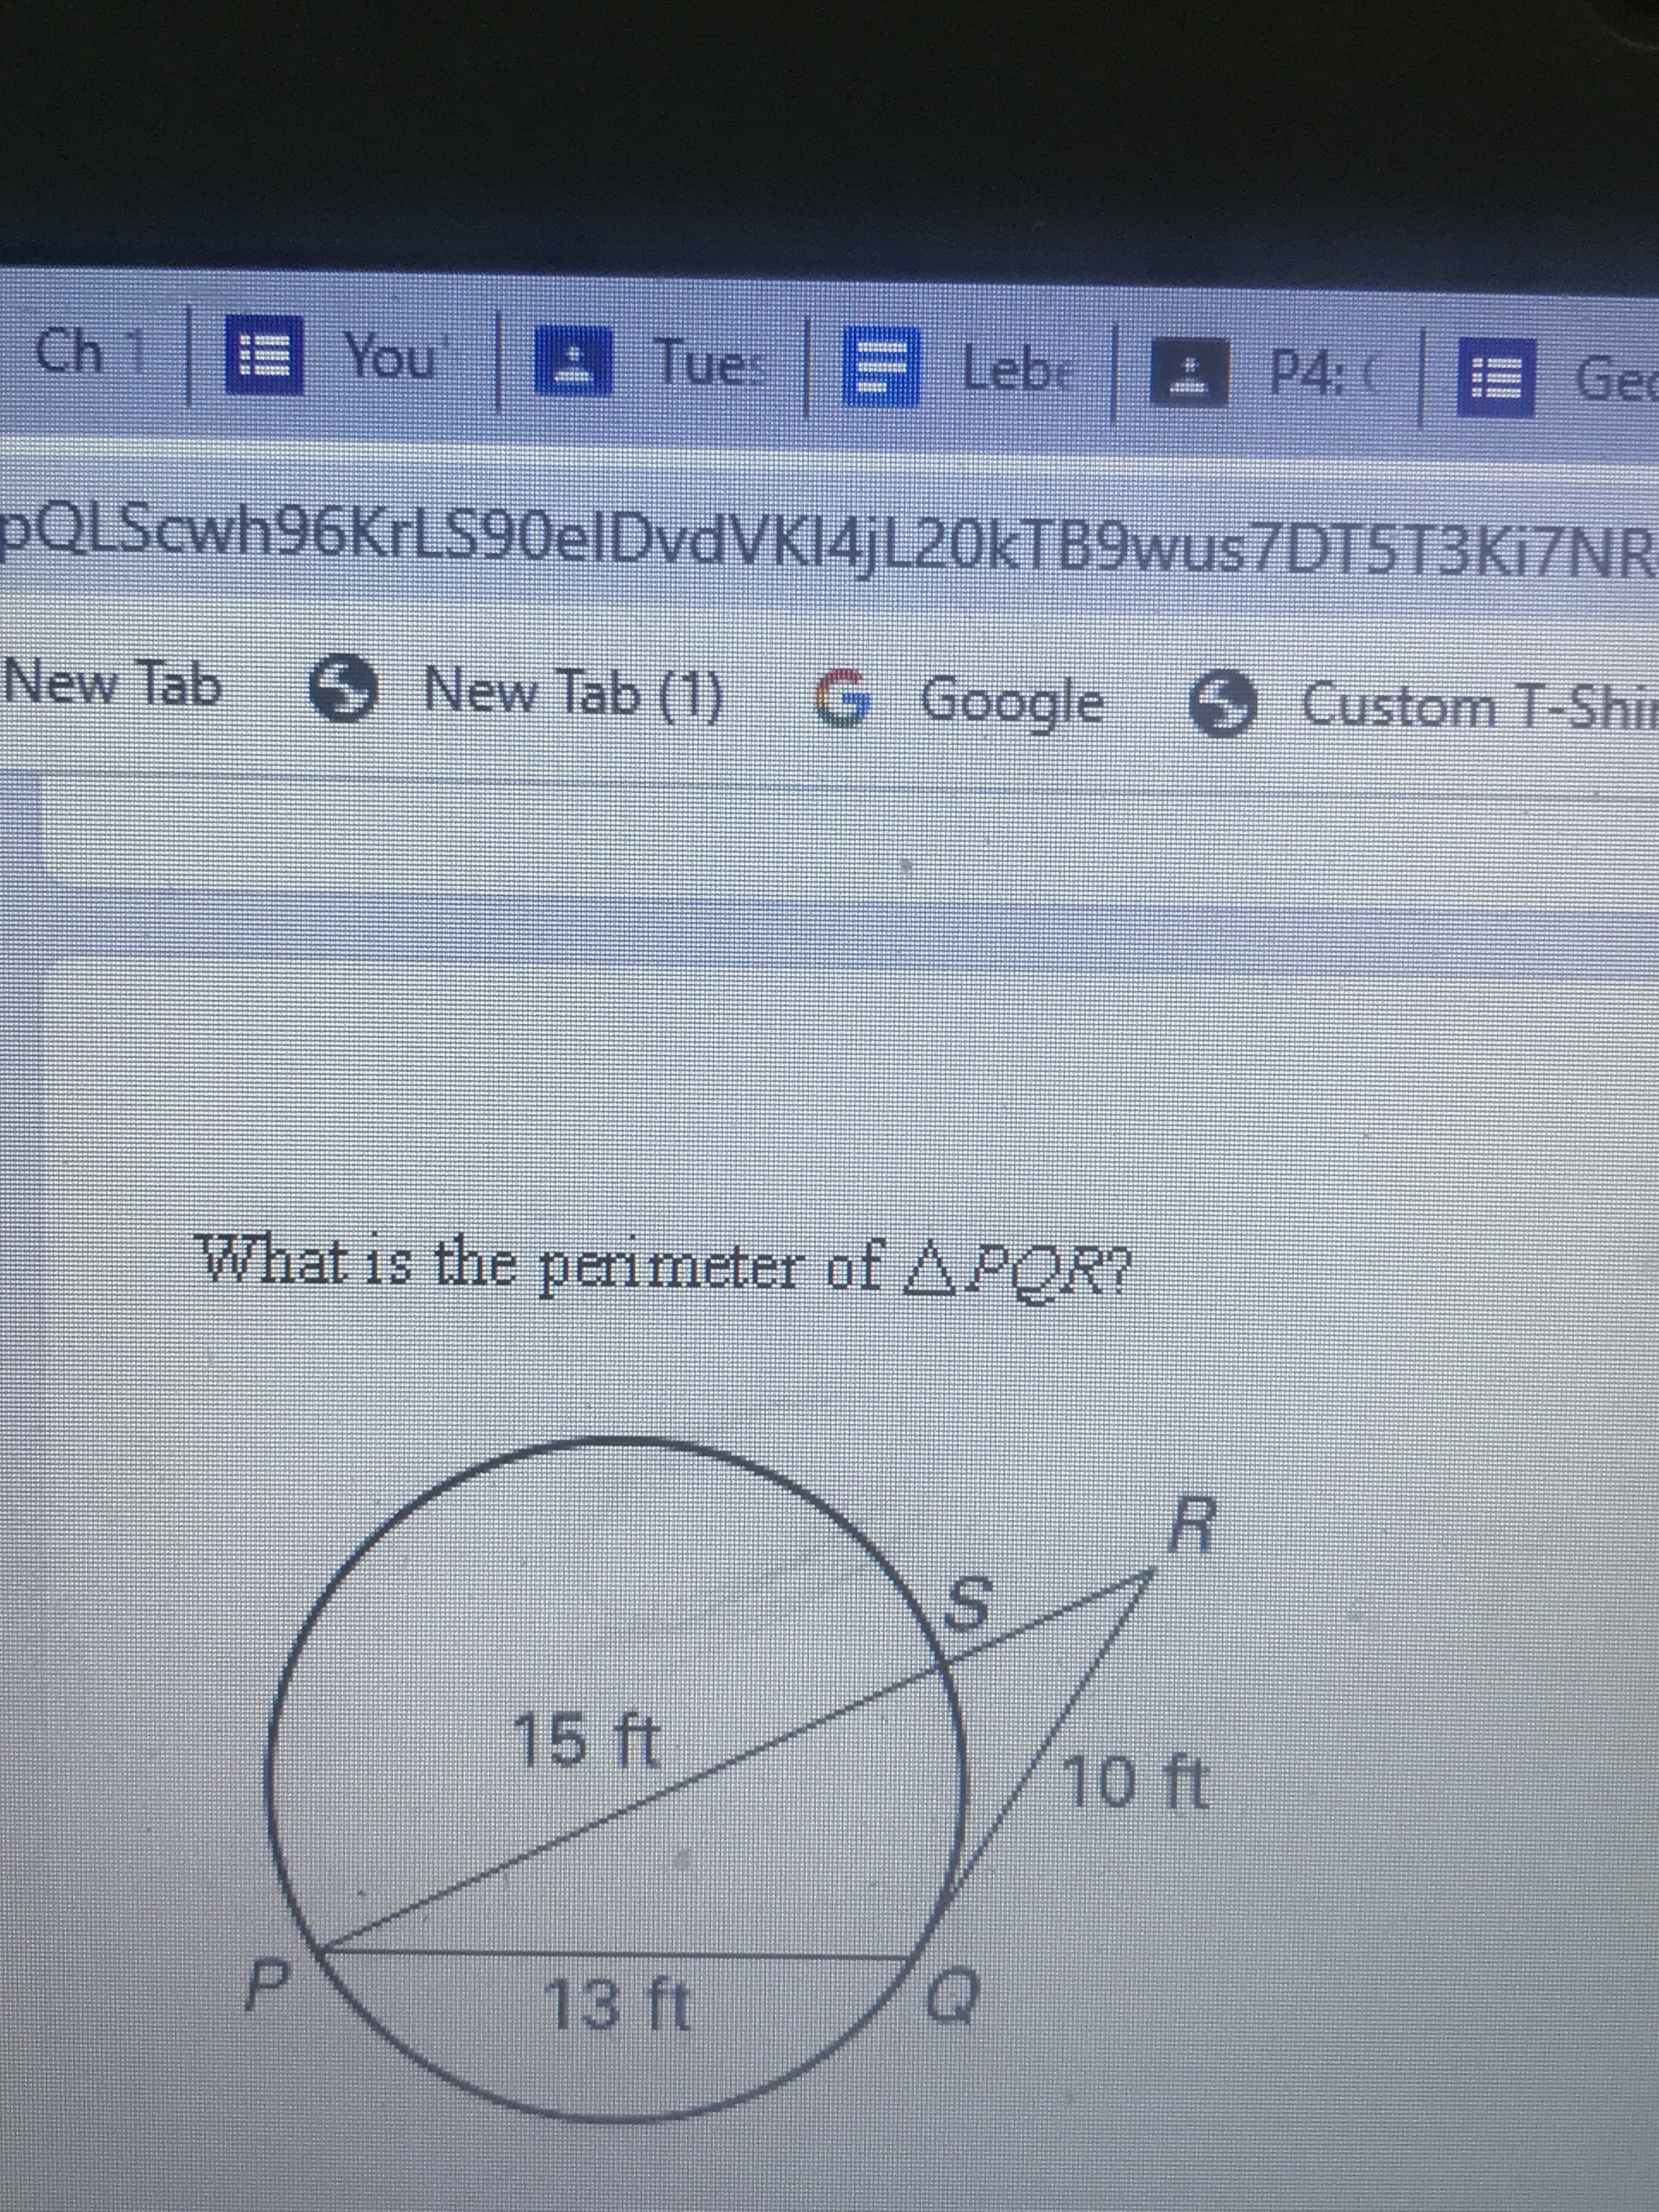 What is the perimeter of APQR?
